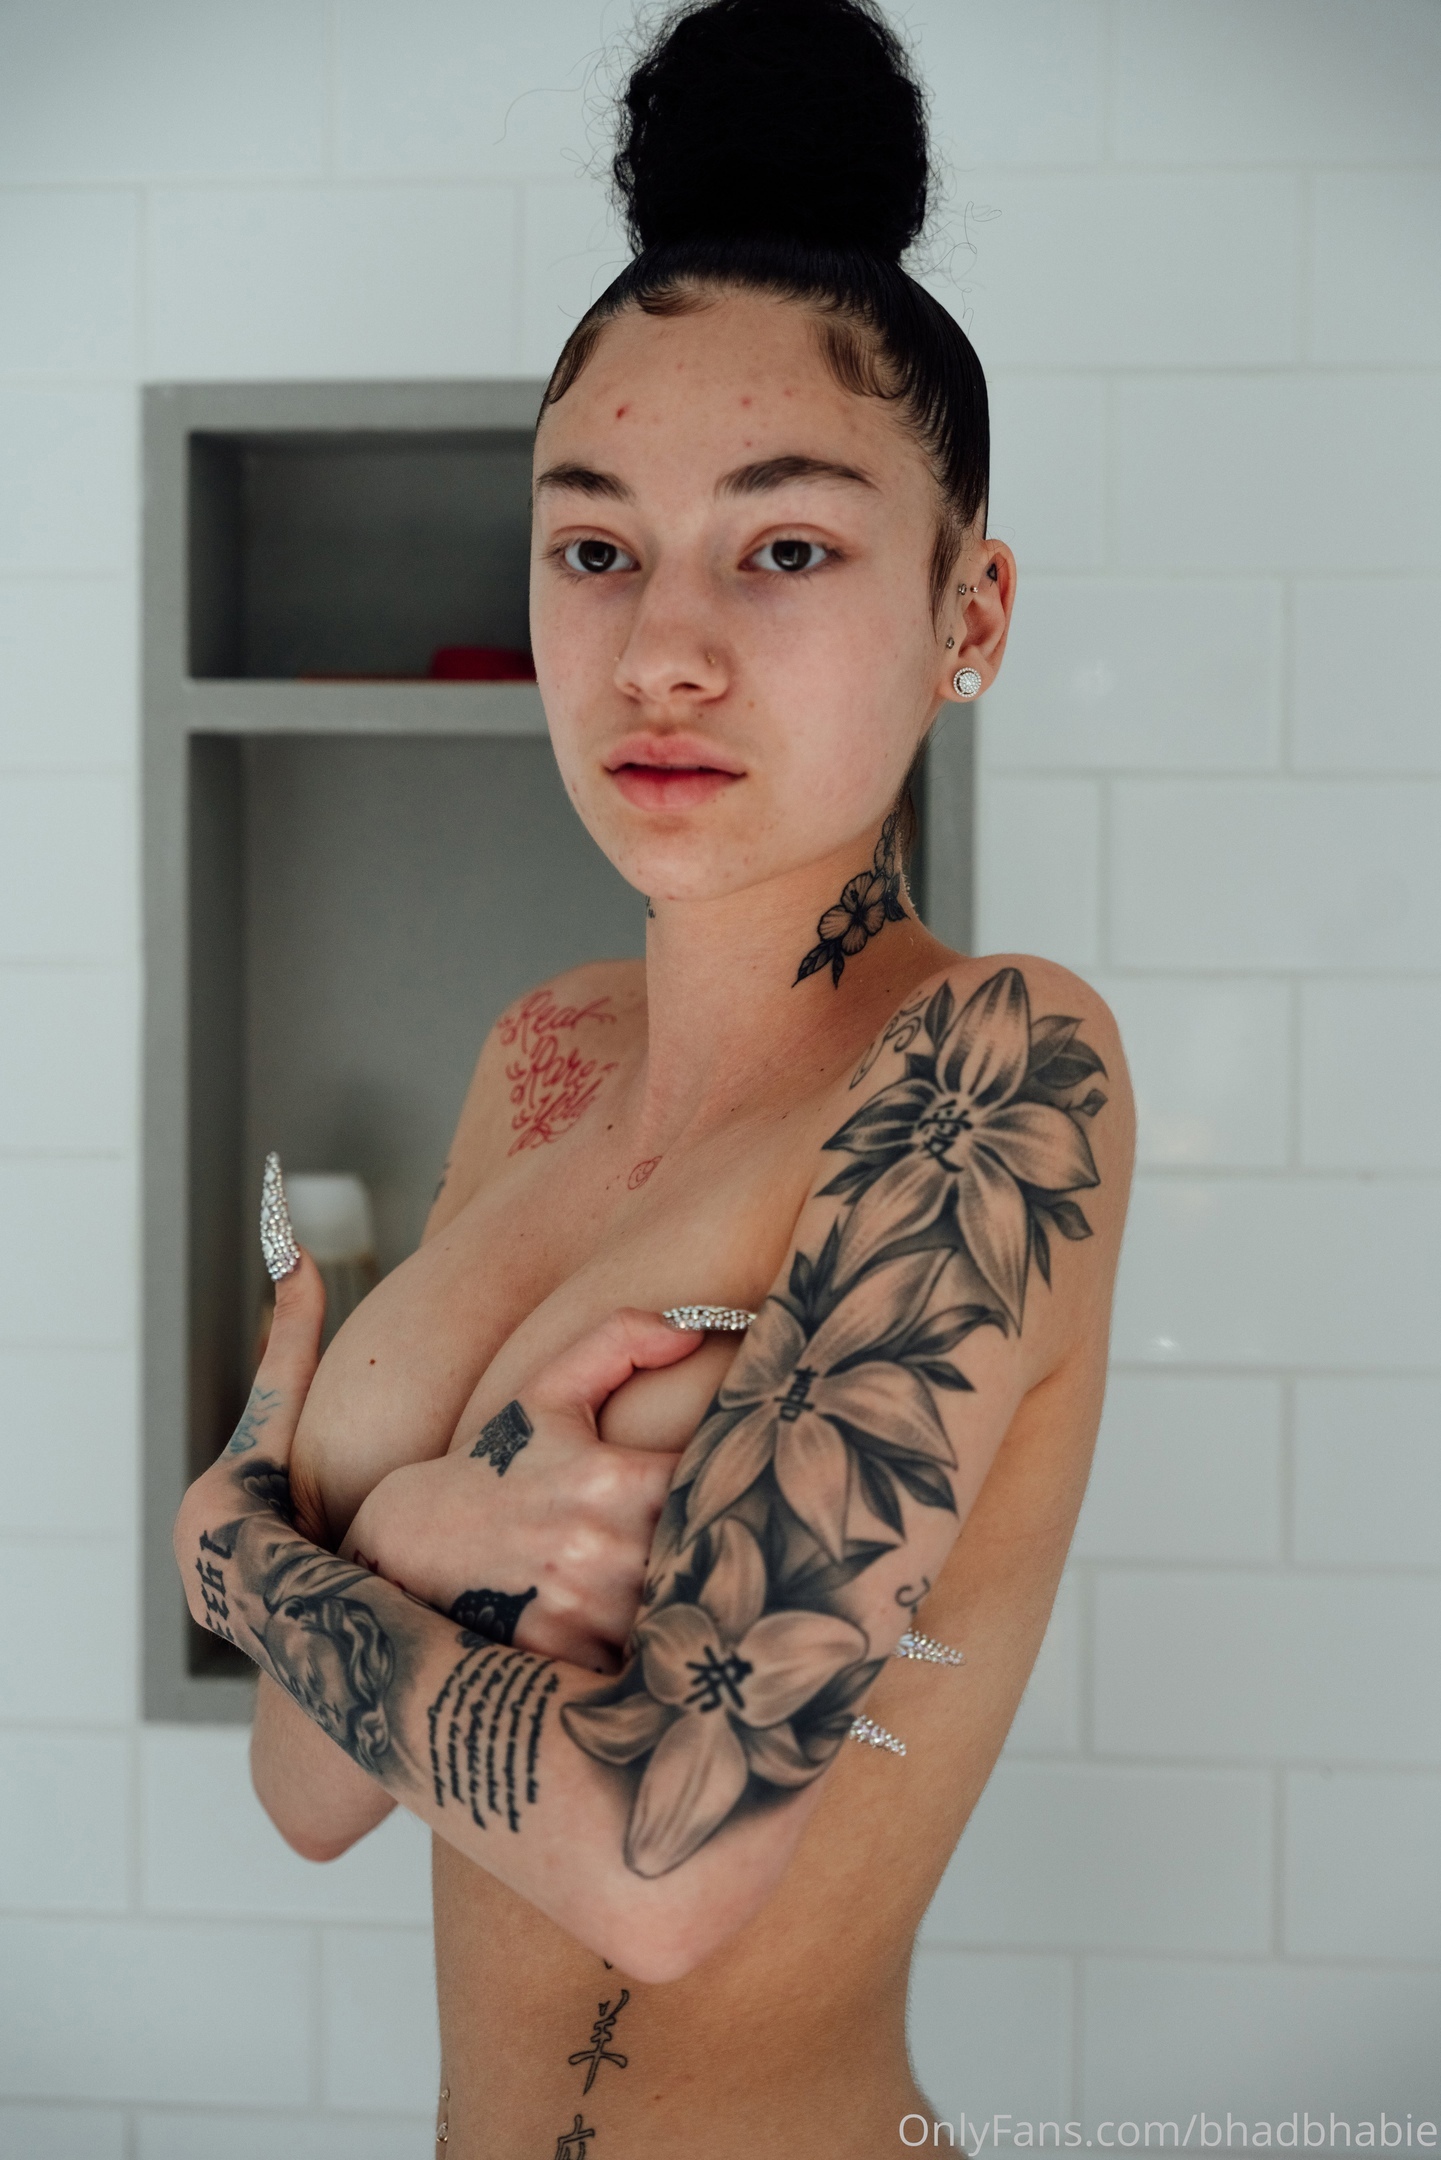 Bhad bhabie onlyfans.leaked